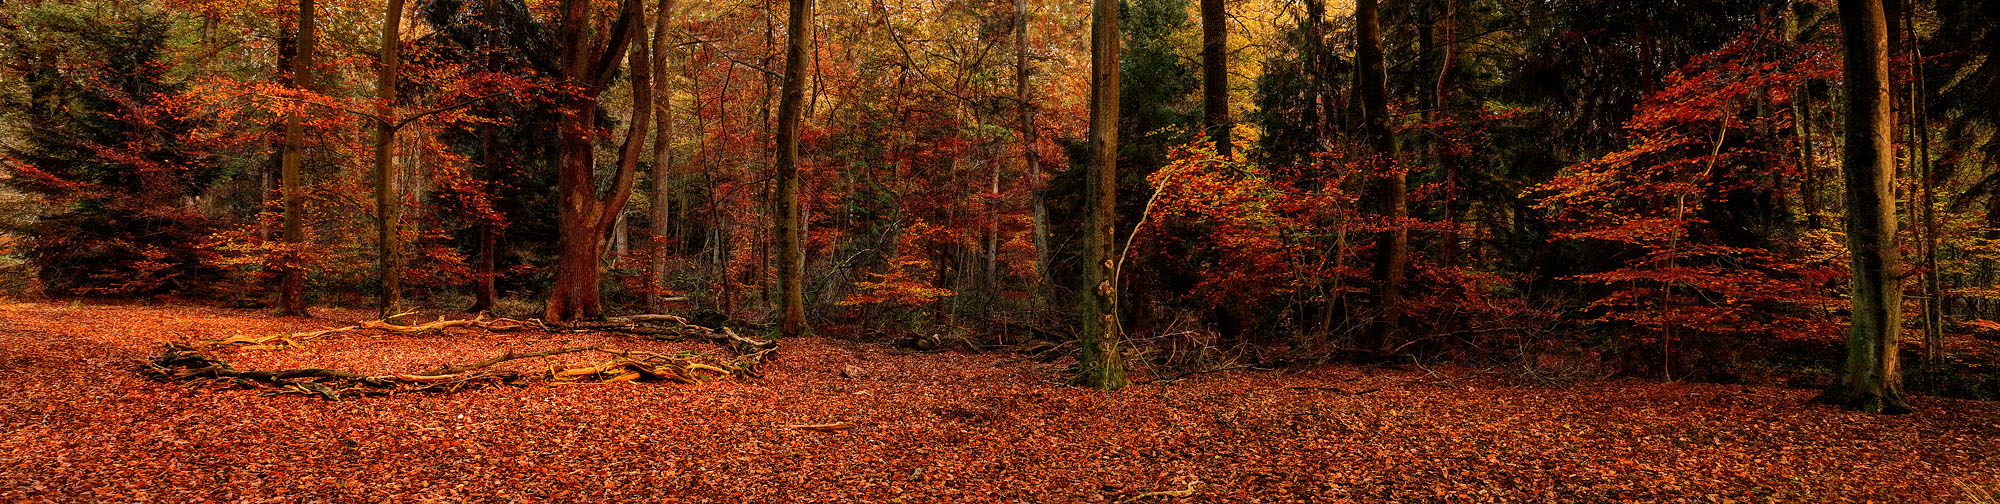 Dense forest in autumn colors with a glade in last light of sunset.